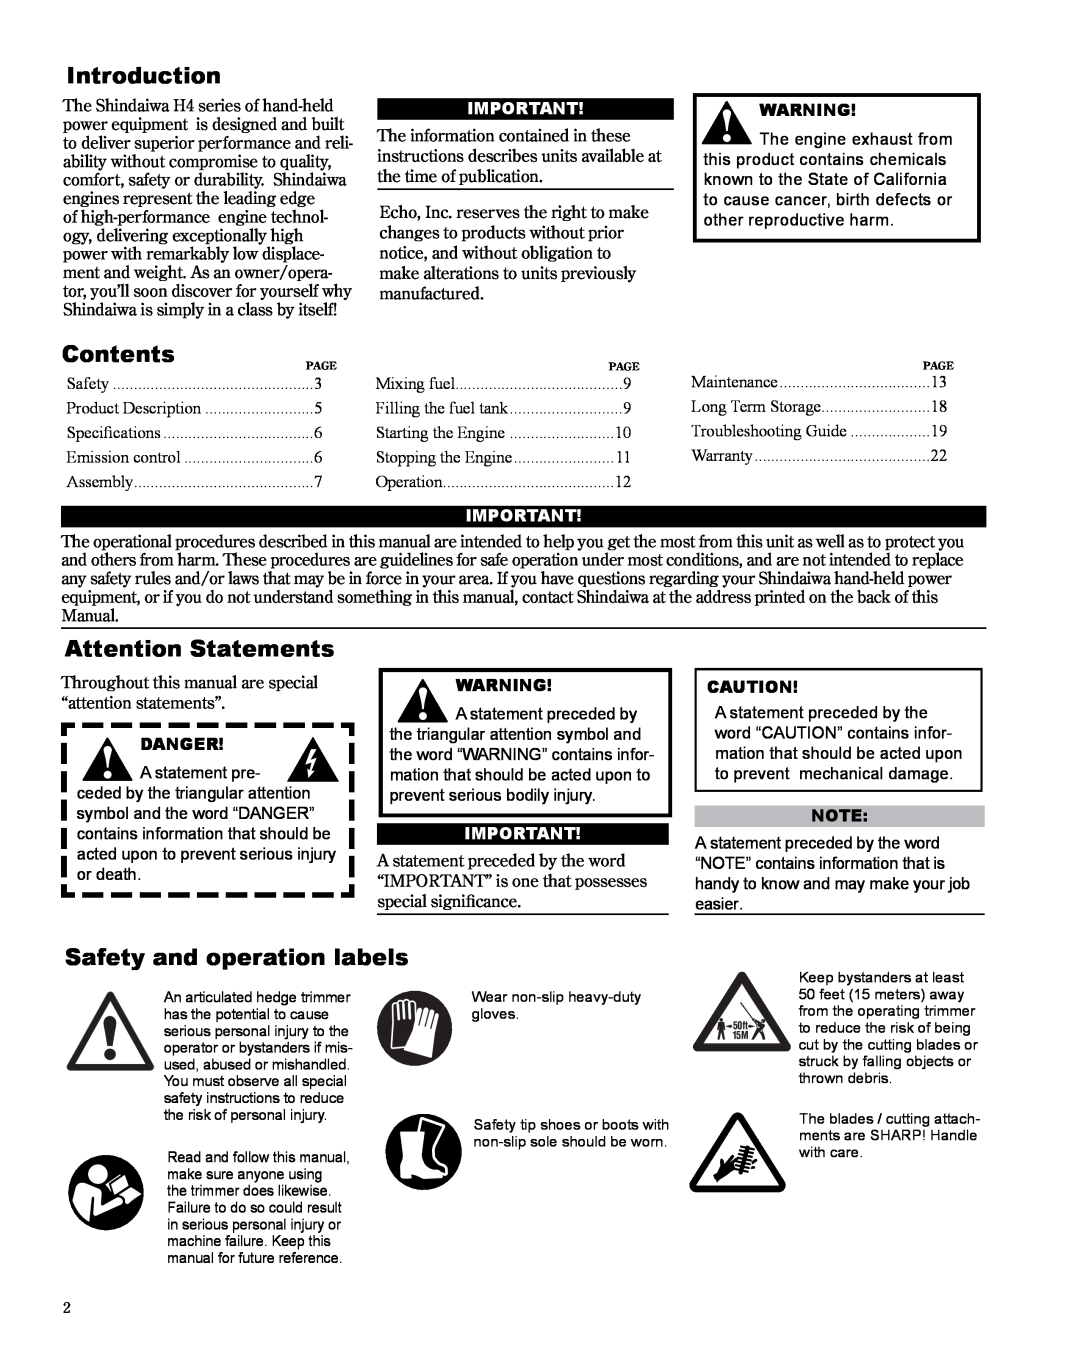 Shindaiwa X7502872300 manual Introduction, Contents, Attention Statements, Safety and operation labels, Danger 